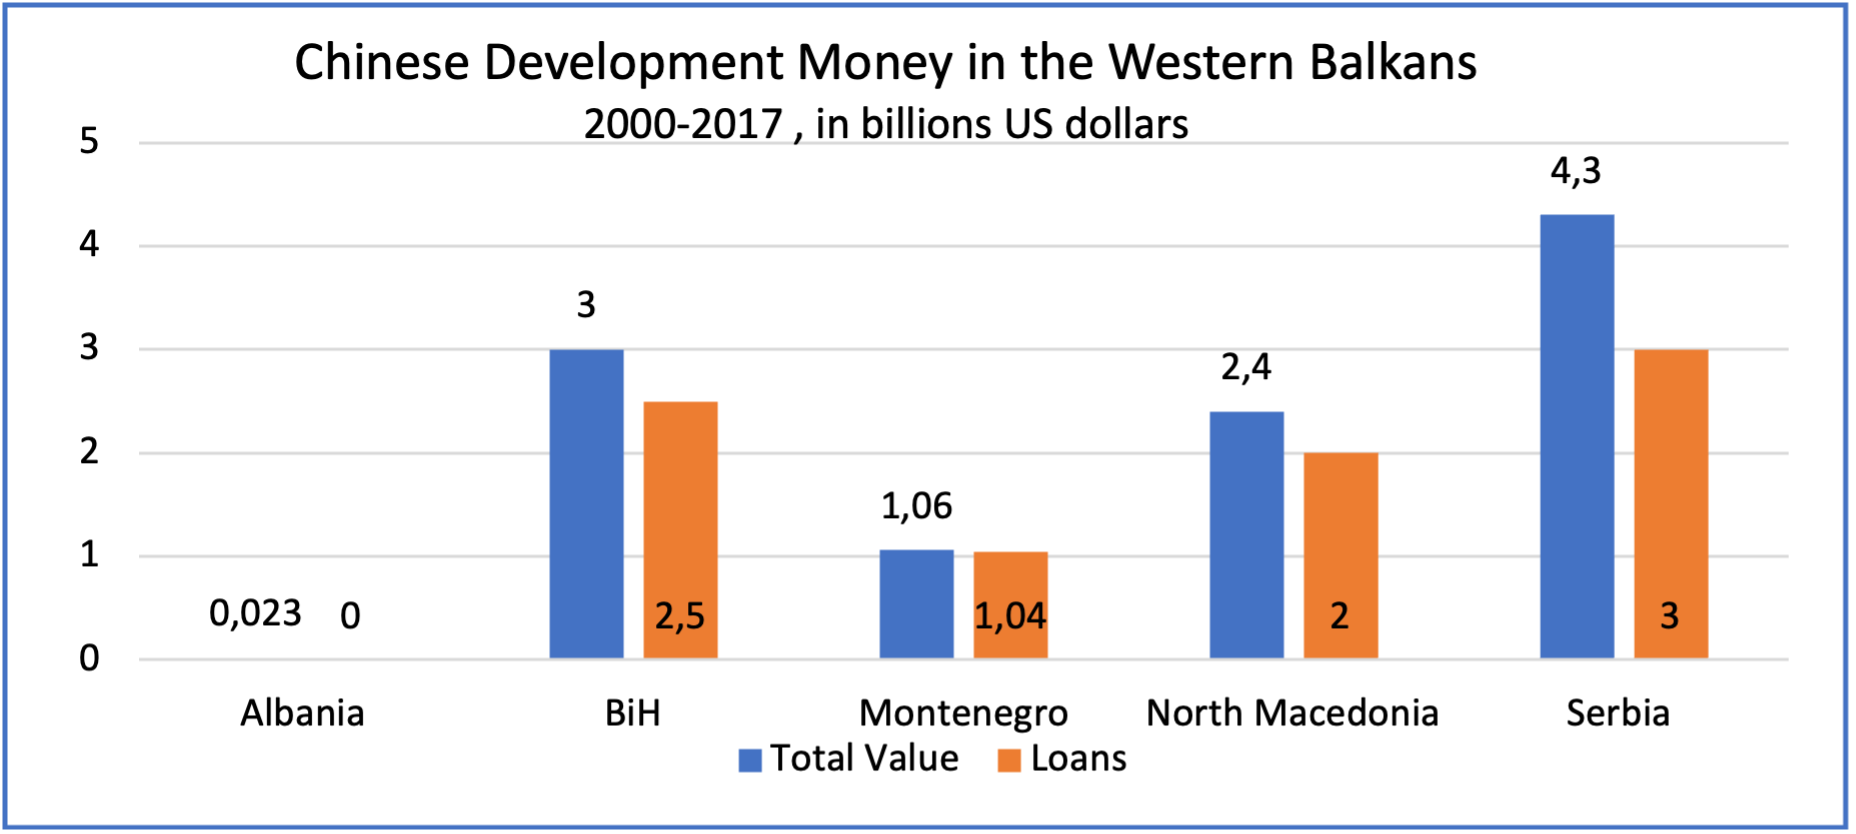 China’s Development Money (loans and grants) in the Western Balkans, 2000-2017